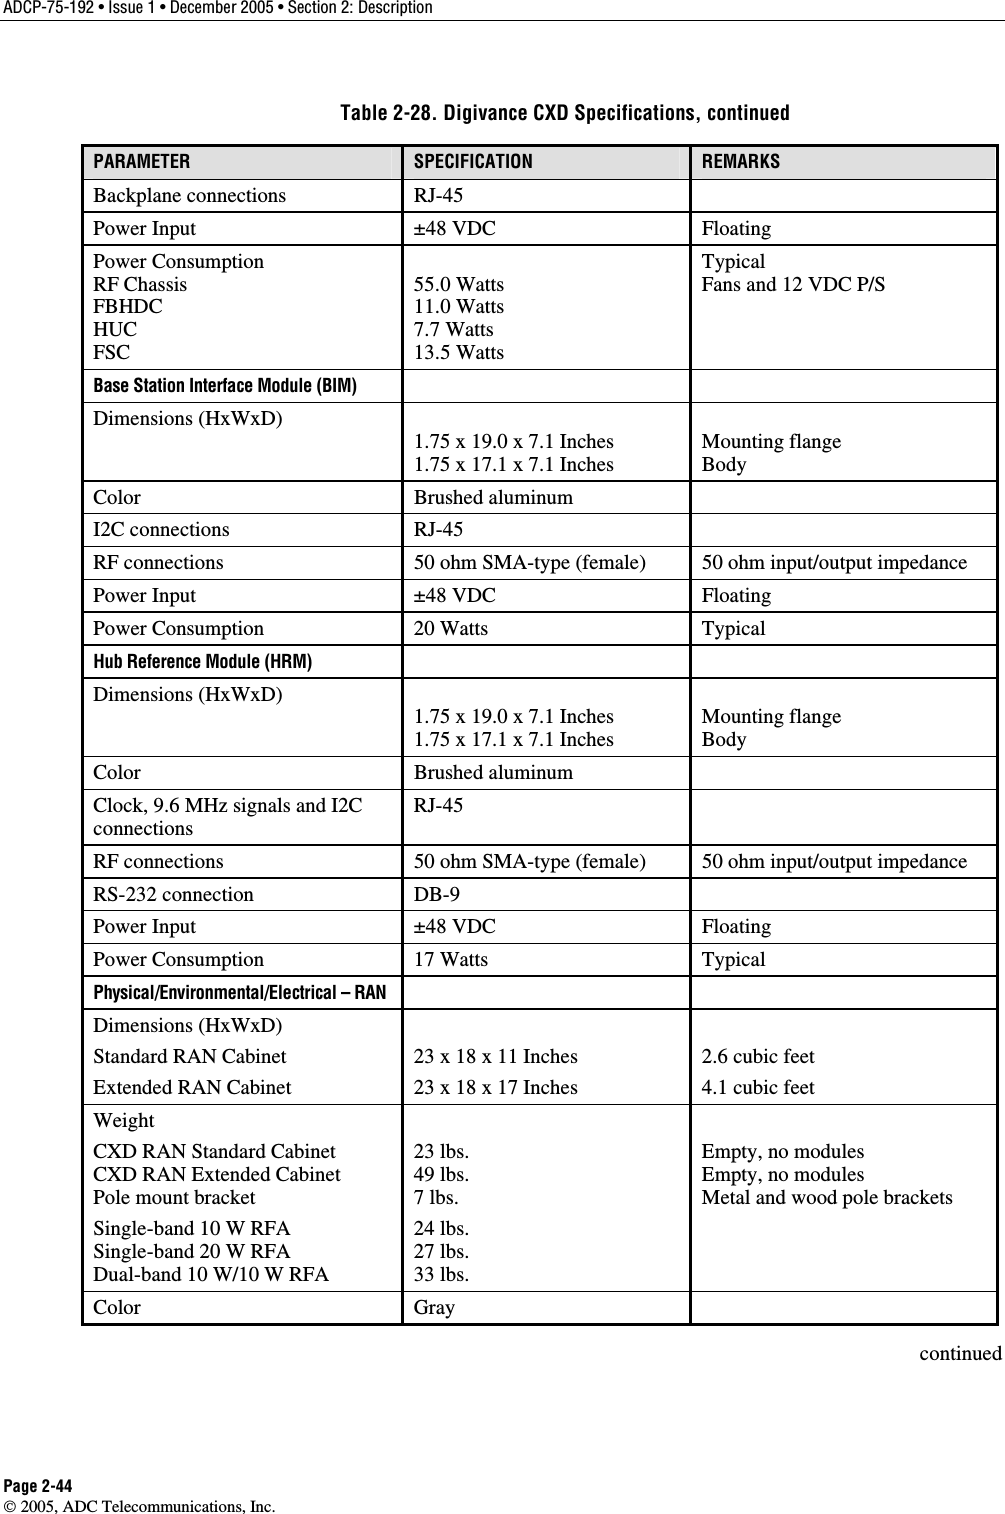 ADCP-75-192 • Issue 1 • December 2005 • Section 2: Description Page 2-44  2005, ADC Telecommunications, Inc. Table 2-28. Digivance CXD Specifications, continued PARAMETER  SPECIFICATION  REMARKS Backplane connections  RJ-45   Power Input  ±48 VDC  Floating Power Consumption  RF Chassis FBHDC HUC FSC  55.0 Watts 11.0 Watts 7.7 Watts 13.5 Watts Typical Fans and 12 VDC P/S Base Station Interface Module (BIM)    Dimensions (HxWxD)  1.75 x 19.0 x 7.1 Inches 1.75 x 17.1 x 7.1 Inches  Mounting flange Body Color Brushed aluminum  I2C connections  RJ-45   RF connections  50 ohm SMA-type (female)  50 ohm input/output impedance Power Input  ±48 VDC  Floating Power Consumption  20 Watts  Typical Hub Reference Module (HRM)    Dimensions (HxWxD)  1.75 x 19.0 x 7.1 Inches 1.75 x 17.1 x 7.1 Inches  Mounting flange Body Color Brushed aluminum  Clock, 9.6 MHz signals and I2C connections RJ-45  RF connections  50 ohm SMA-type (female)  50 ohm input/output impedance RS-232 connection  DB-9   Power Input  ±48 VDC  Floating Power Consumption  17 Watts  Typical Physical/Environmental/Electrical – RAN    Dimensions (HxWxD) Standard RAN Cabinet Extended RAN Cabinet  23 x 18 x 11 Inches 23 x 18 x 17 Inches  2.6 cubic feet 4.1 cubic feet Weight CXD RAN Standard Cabinet CXD RAN Extended Cabinet Pole mount bracket Single-band 10 W RFA Single-band 20 W RFA Dual-band 10 W/10 W RFA  23 lbs. 49 lbs. 7 lbs. 24 lbs. 27 lbs. 33 lbs.  Empty, no modules Empty, no modules Metal and wood pole brackets  Color Gray  continued 